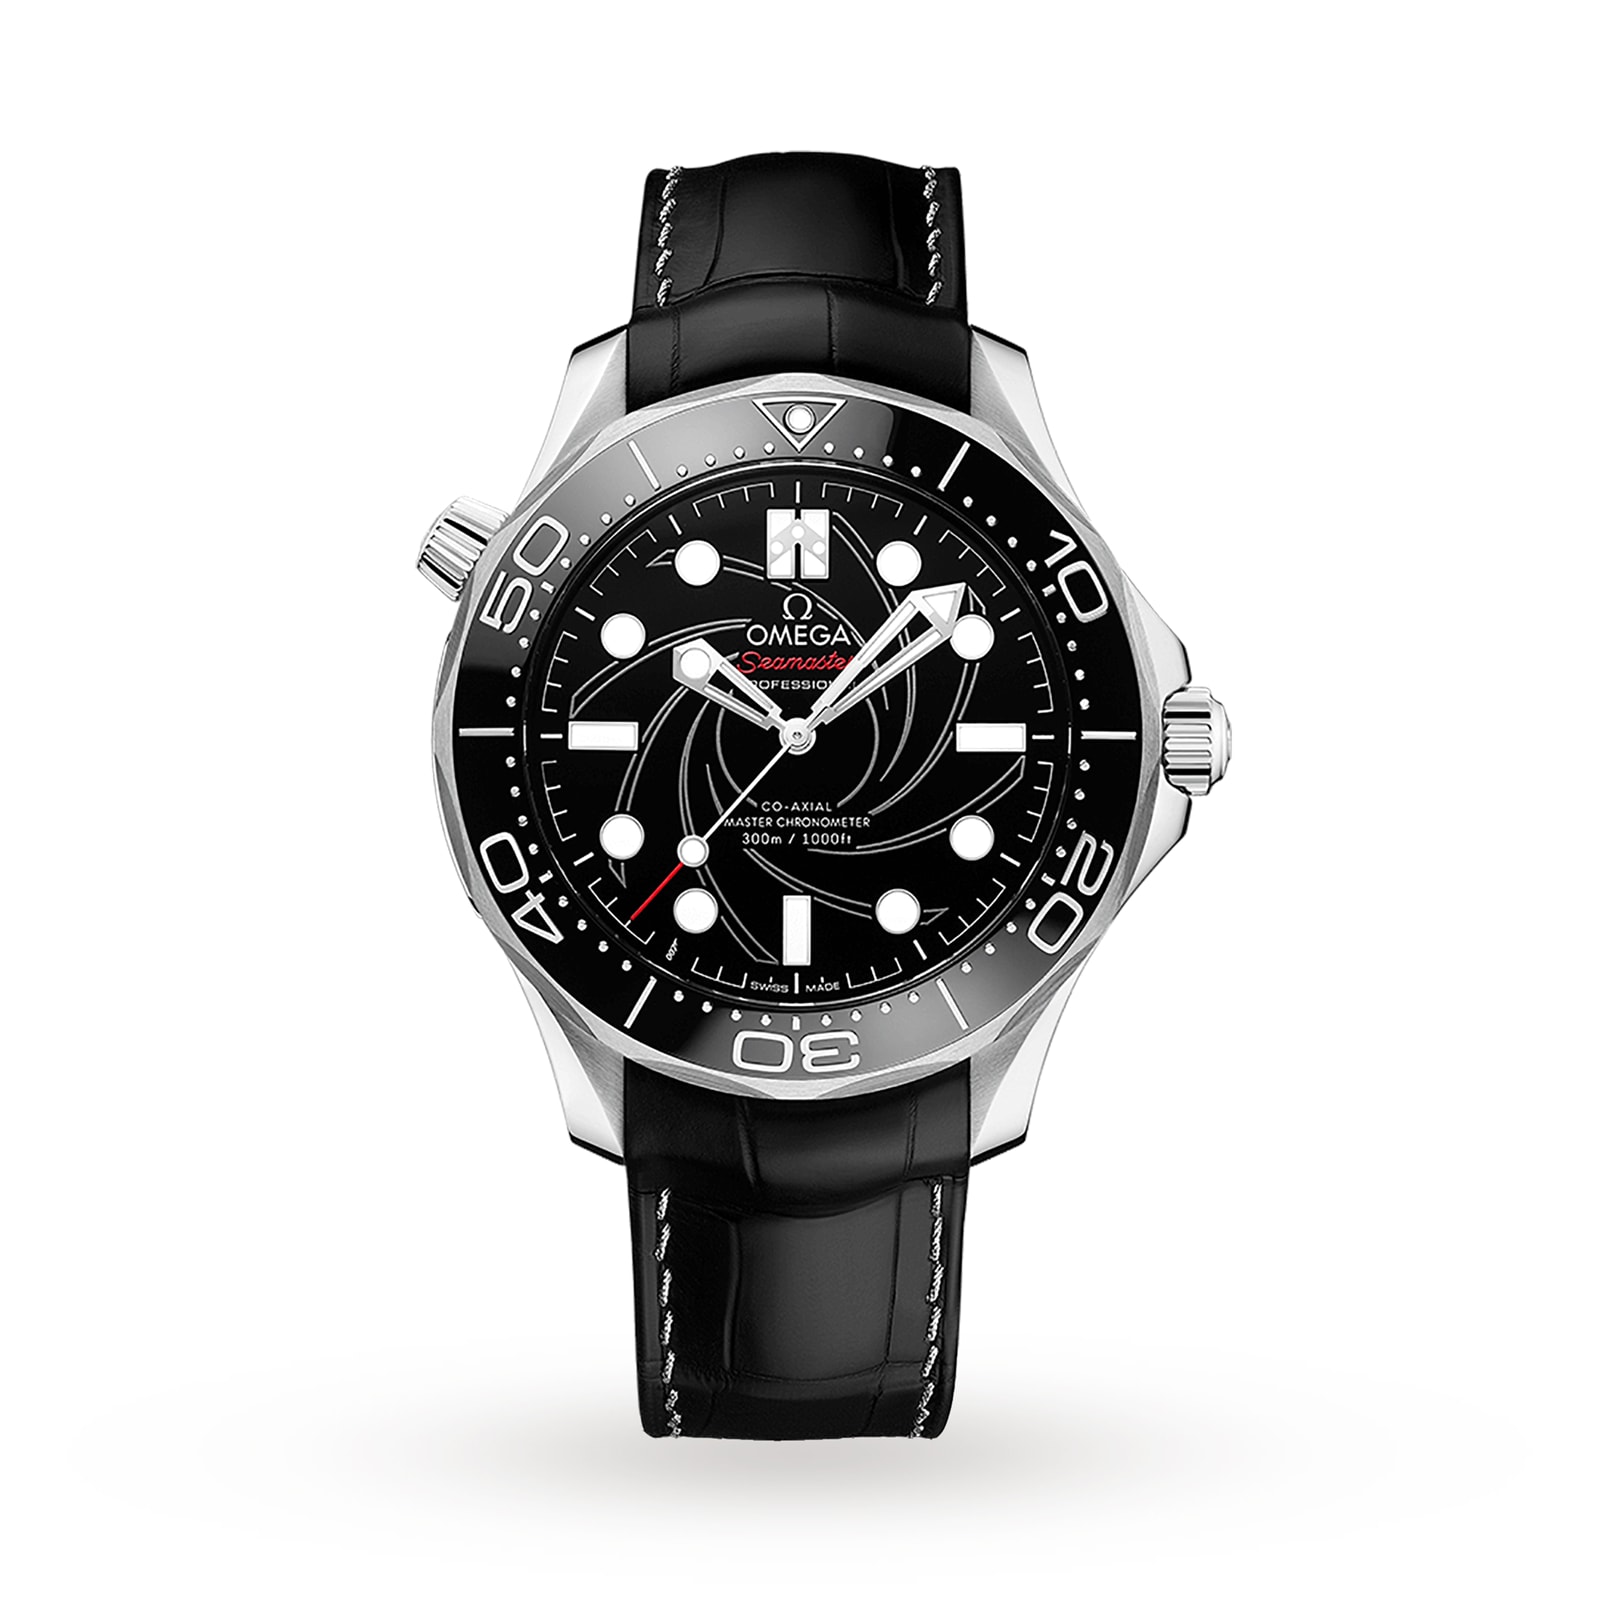 Seamaster Diver 300m Master Co-Axial Chronograph James Bond Numbered Edition